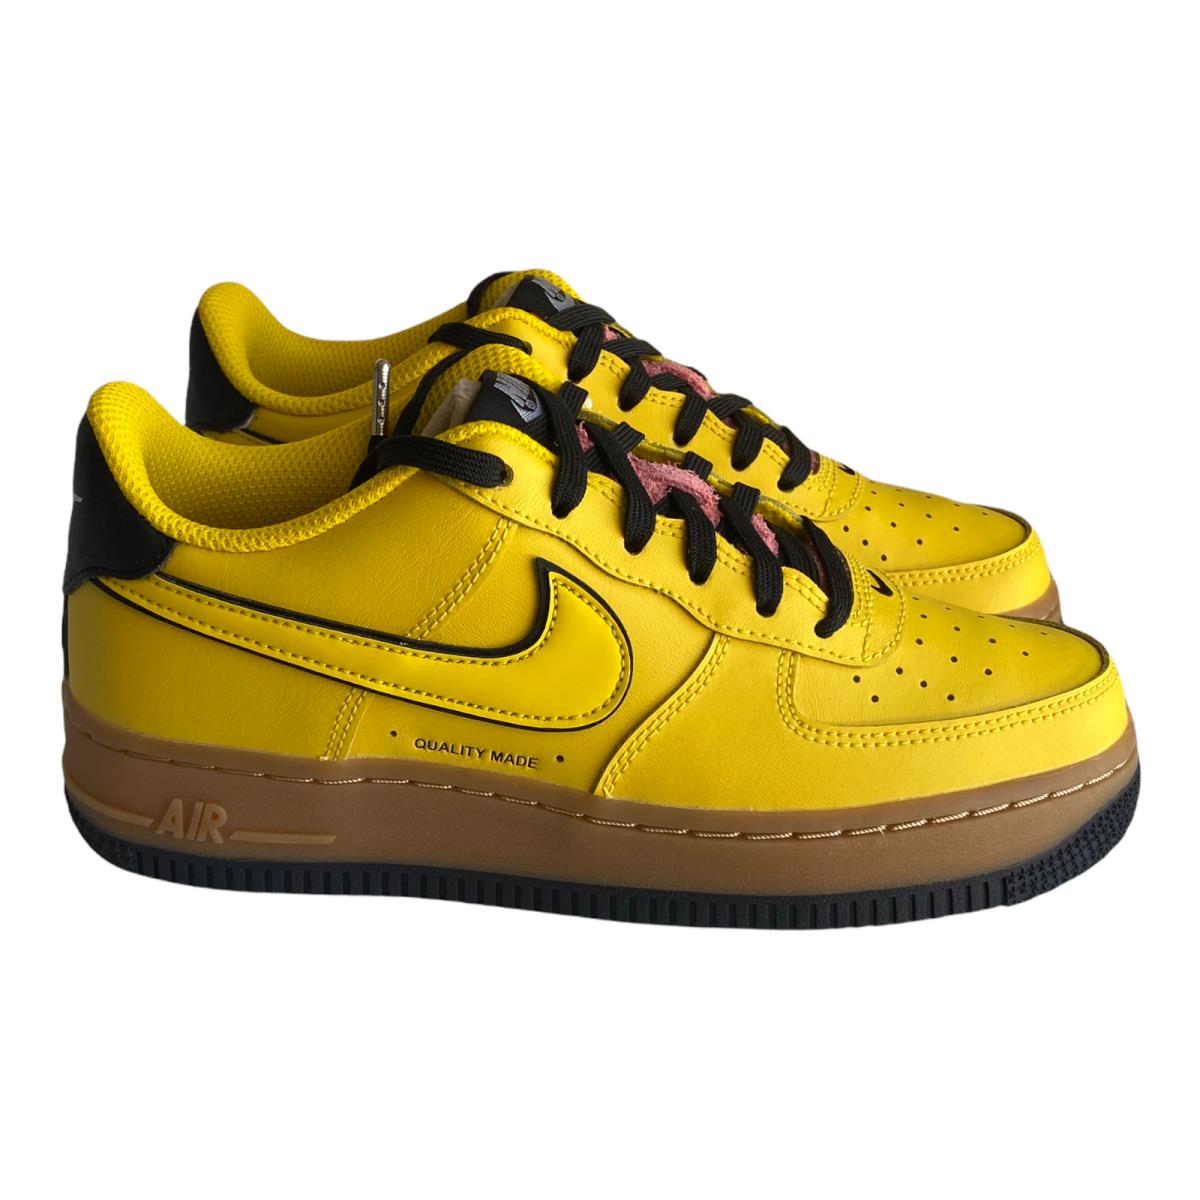 Nike Air Force 1 Low Grade School Black Yellow Gum Sneakers Size 3.5 Youth